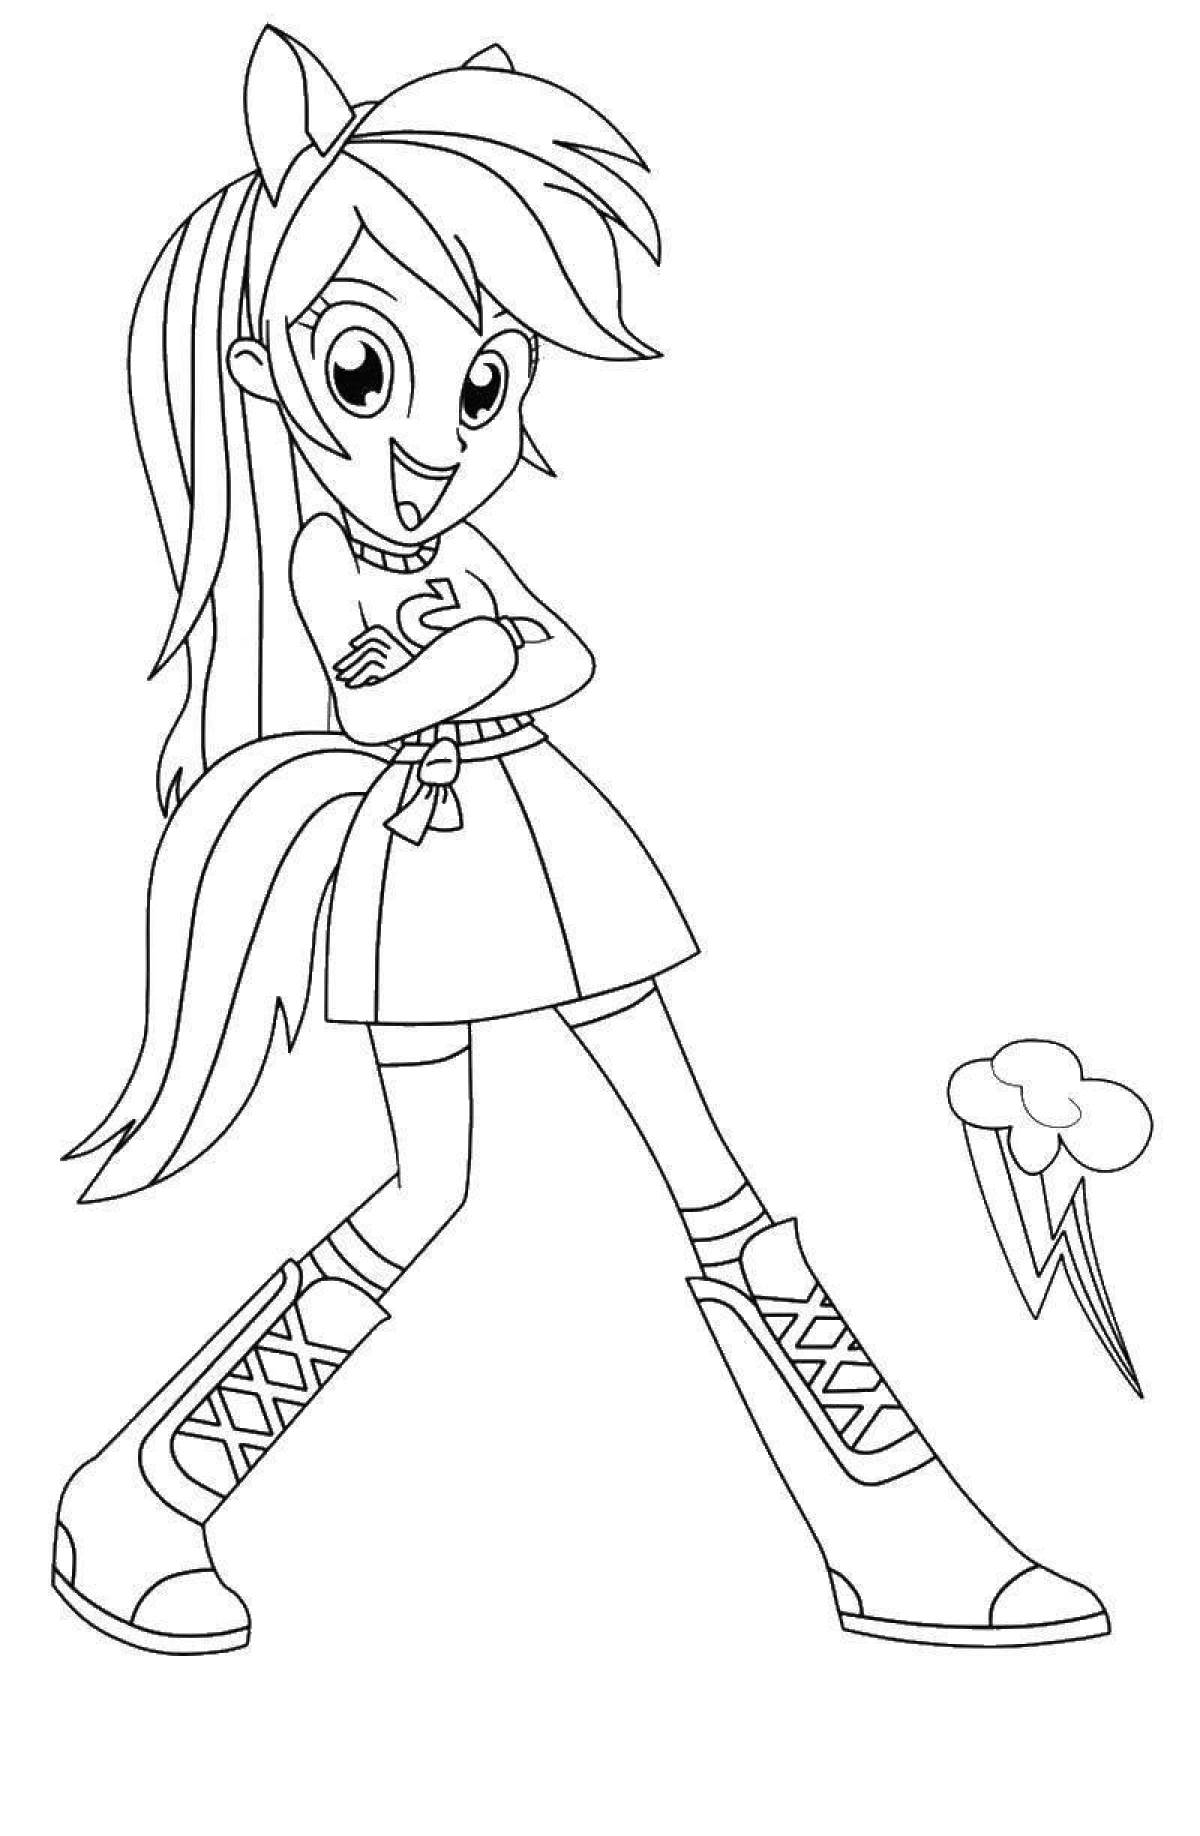 Awesome Equestria Girls Rainbow Rock Coloring Page